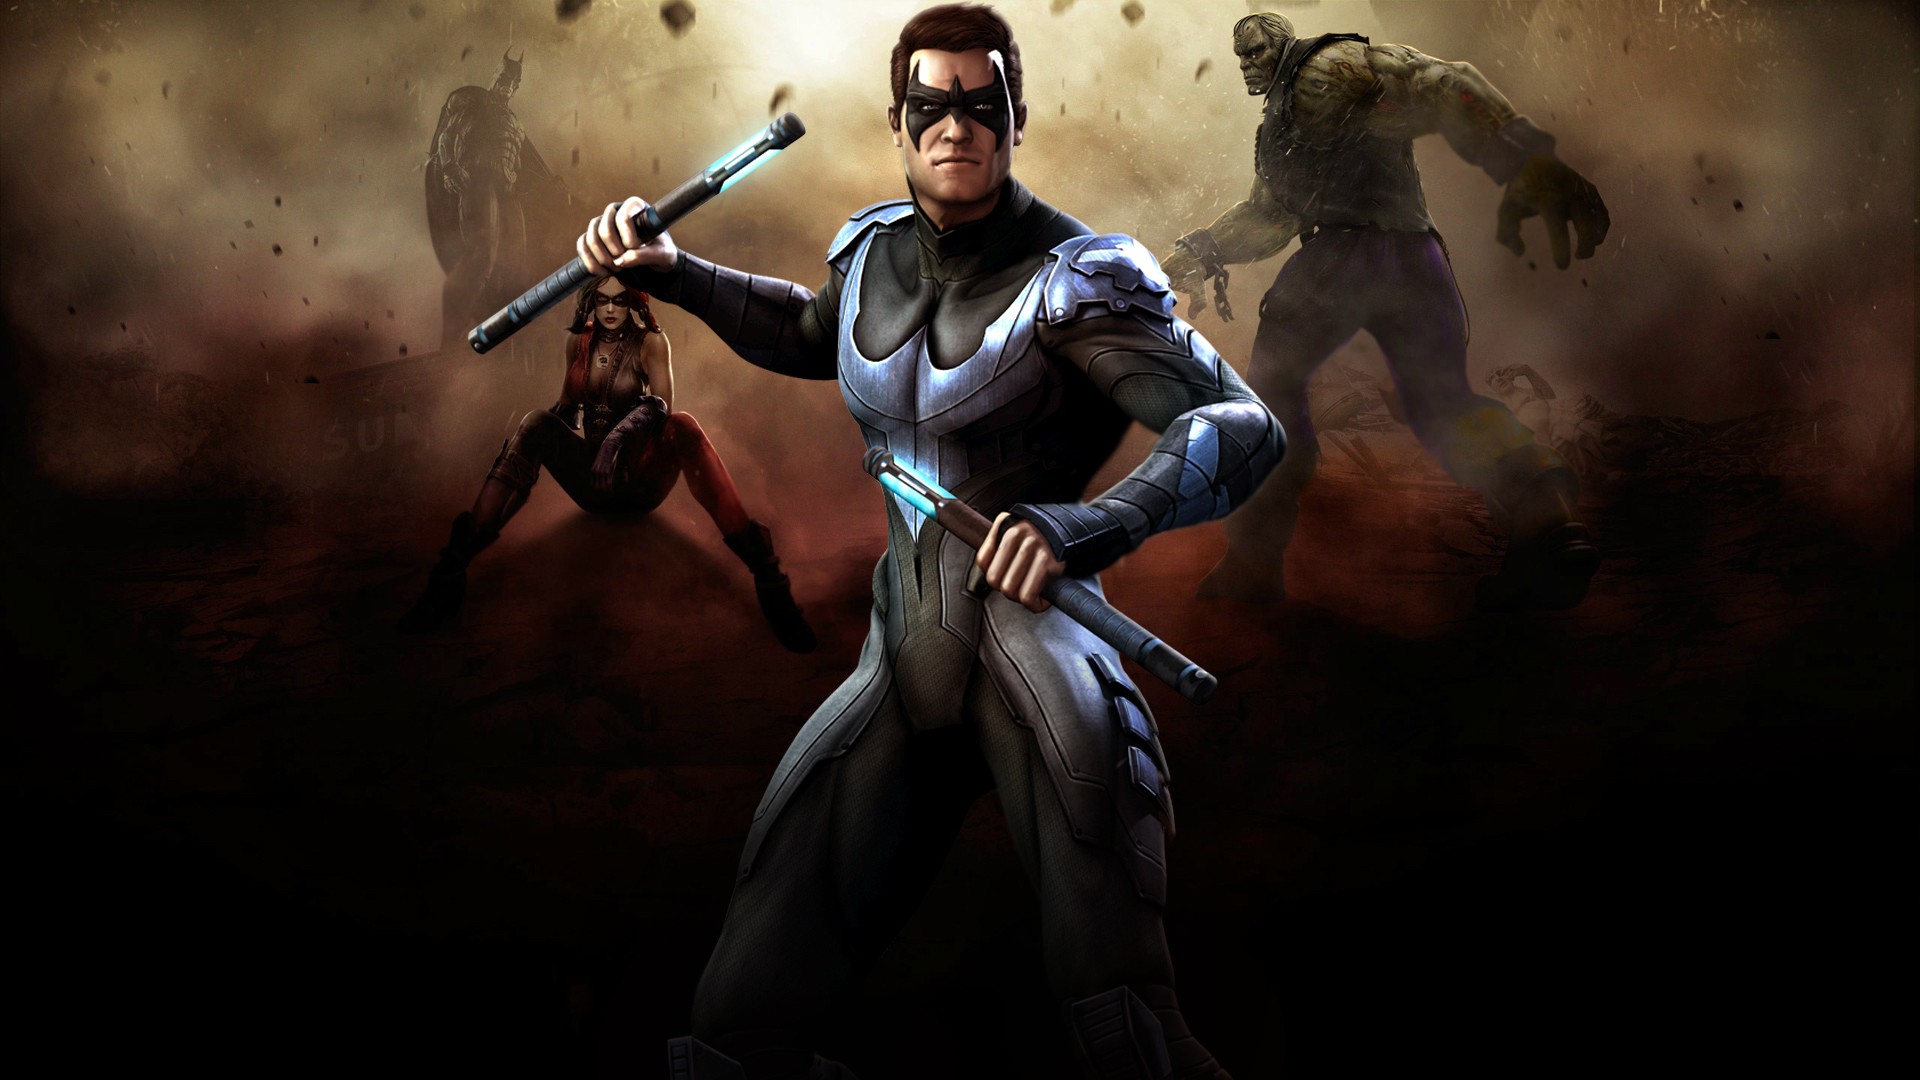 video game, injustice: gods among us, injustice lock screen backgrounds